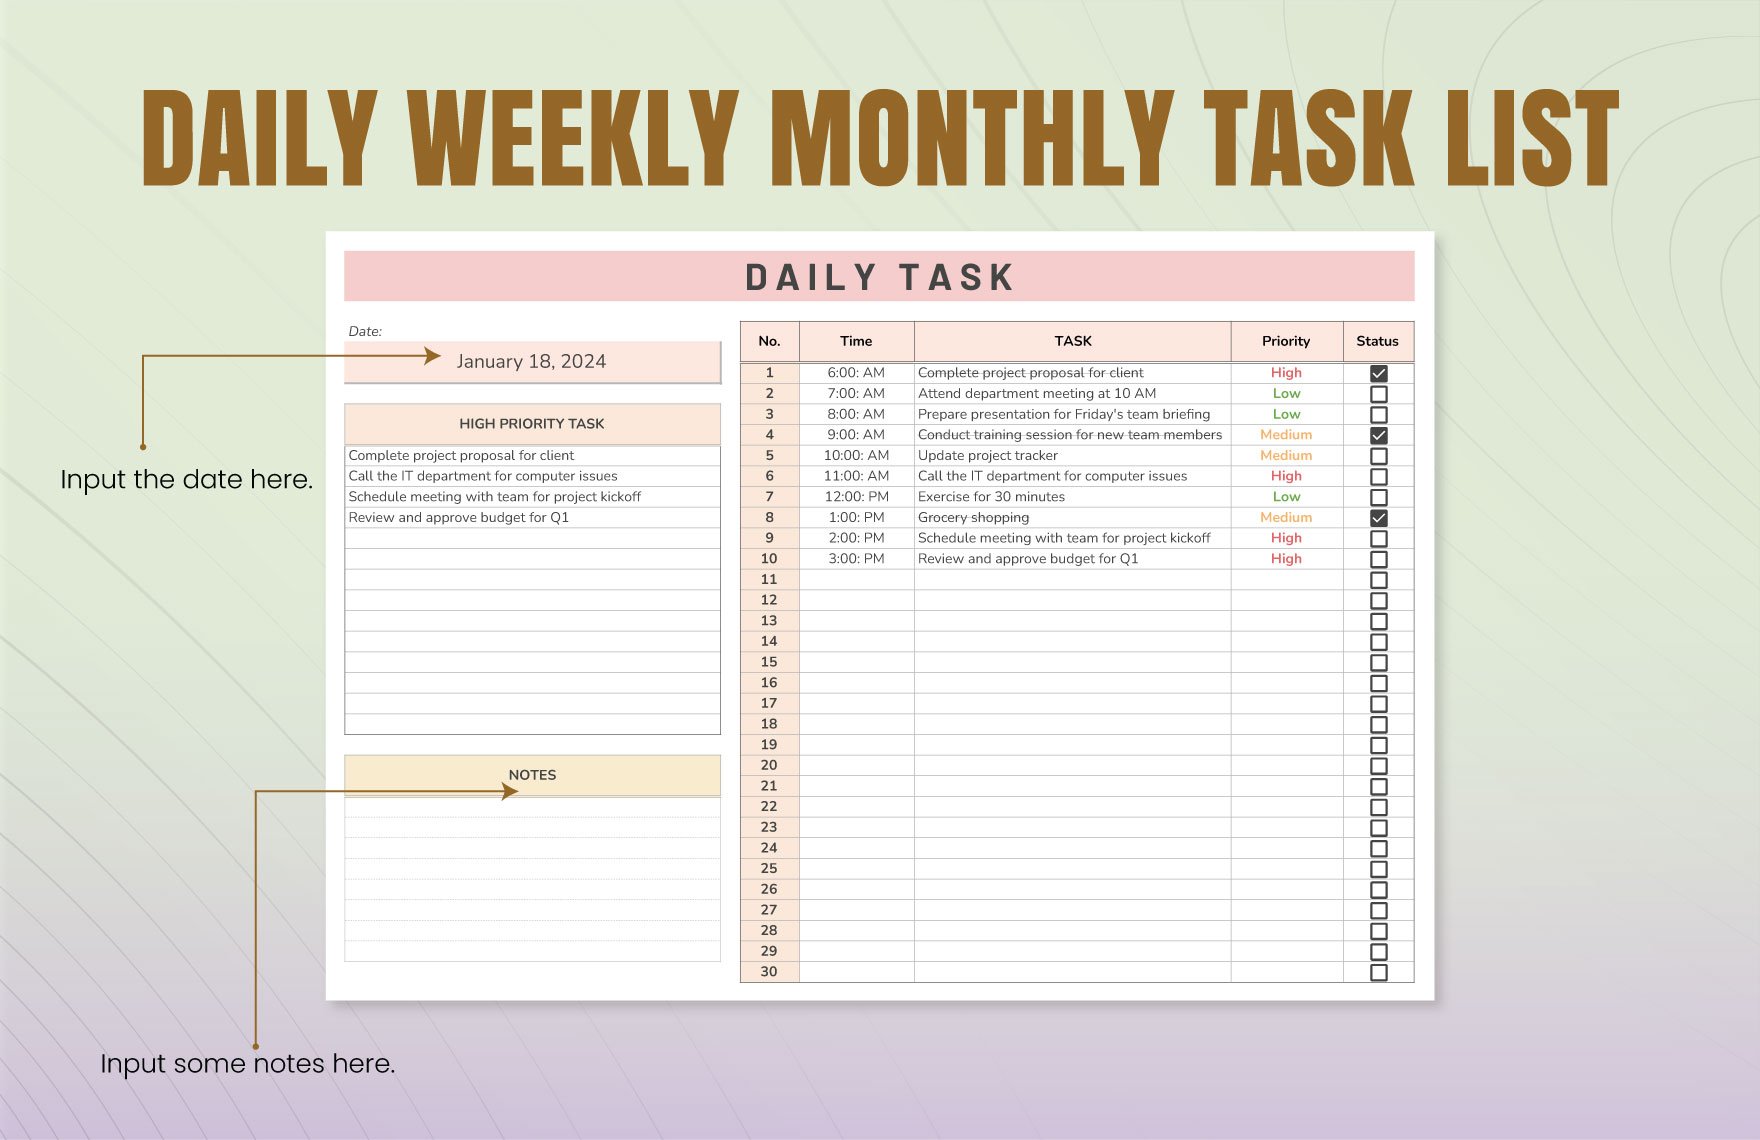 Daily Weekly Monthly Task List Template